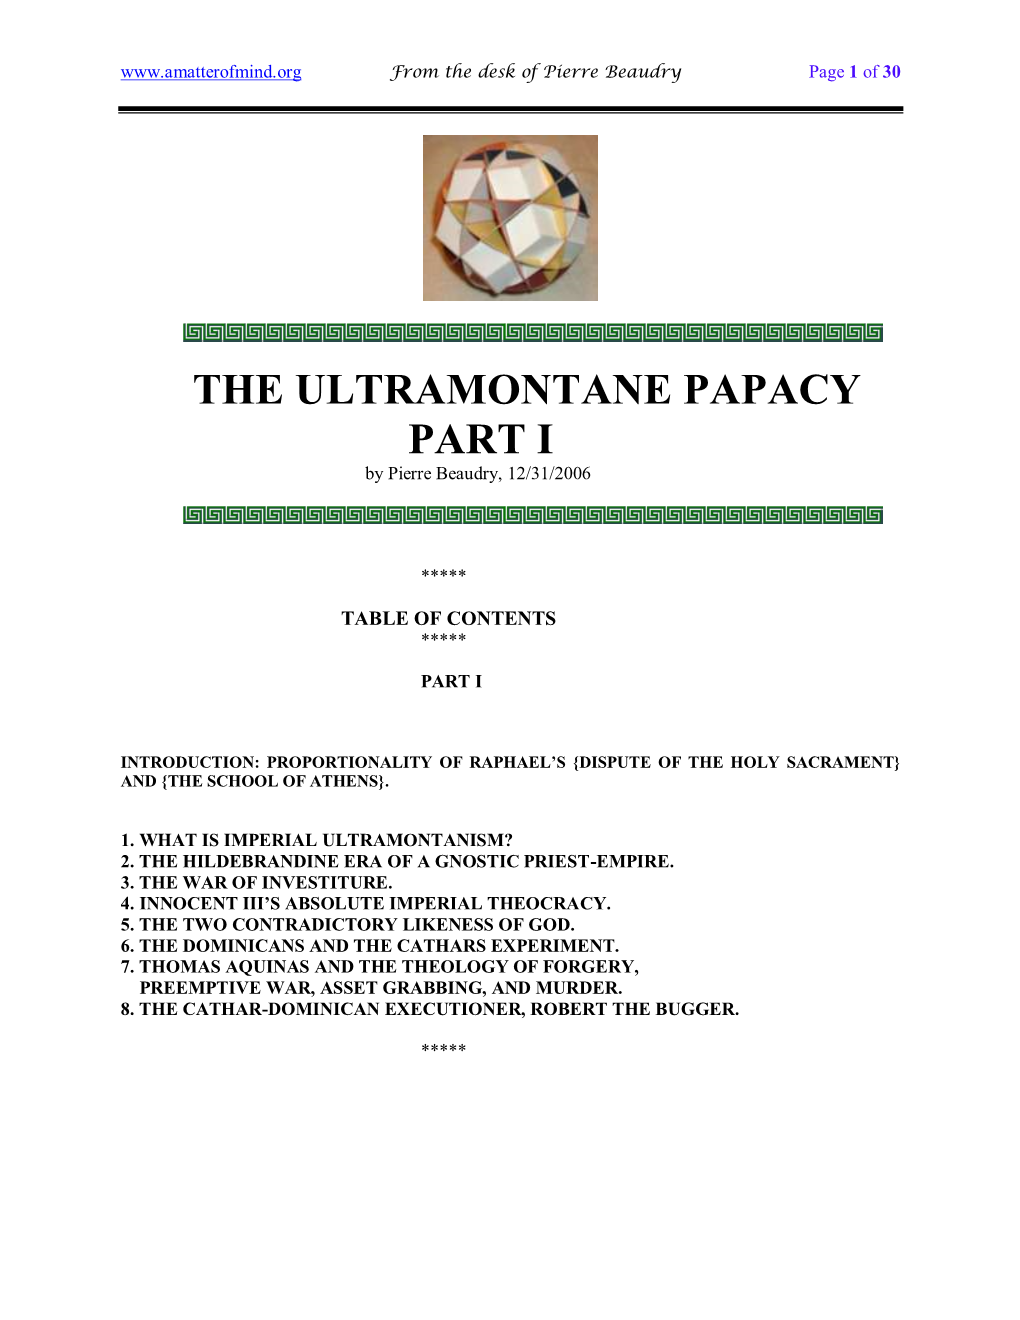 THE ULTRAMONTANE PAPACY PART I by Pierre Beaudry, 12/31/2006